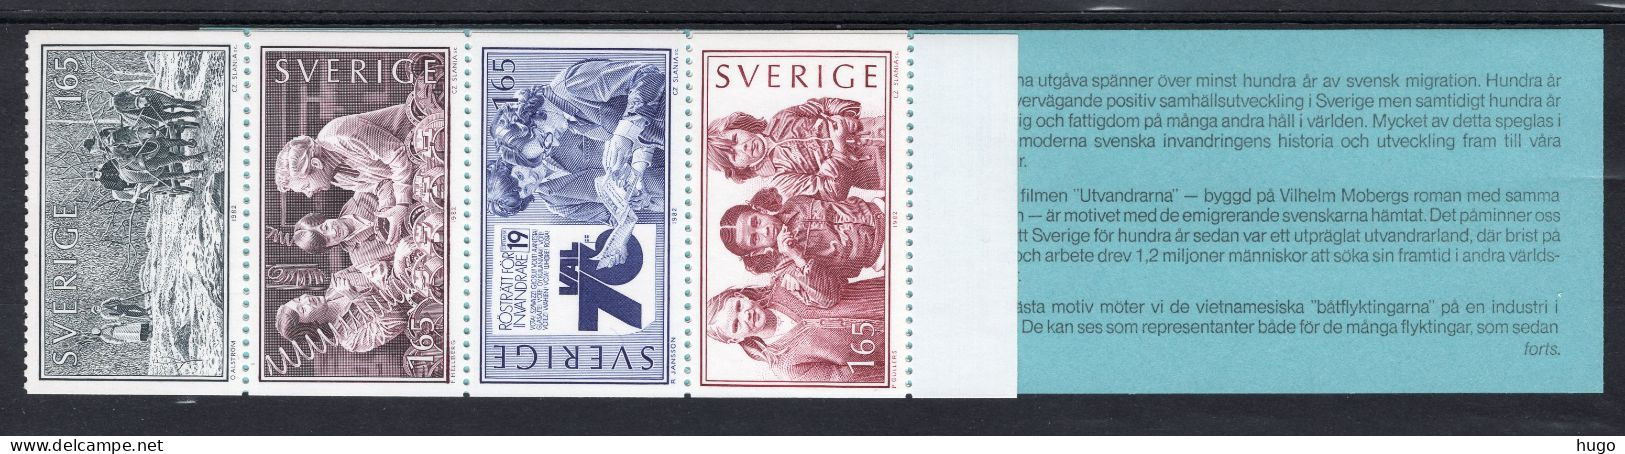 ZWITSERLAND Yt. 650/652° Gestempeld 1960-1963 - Used Stamps